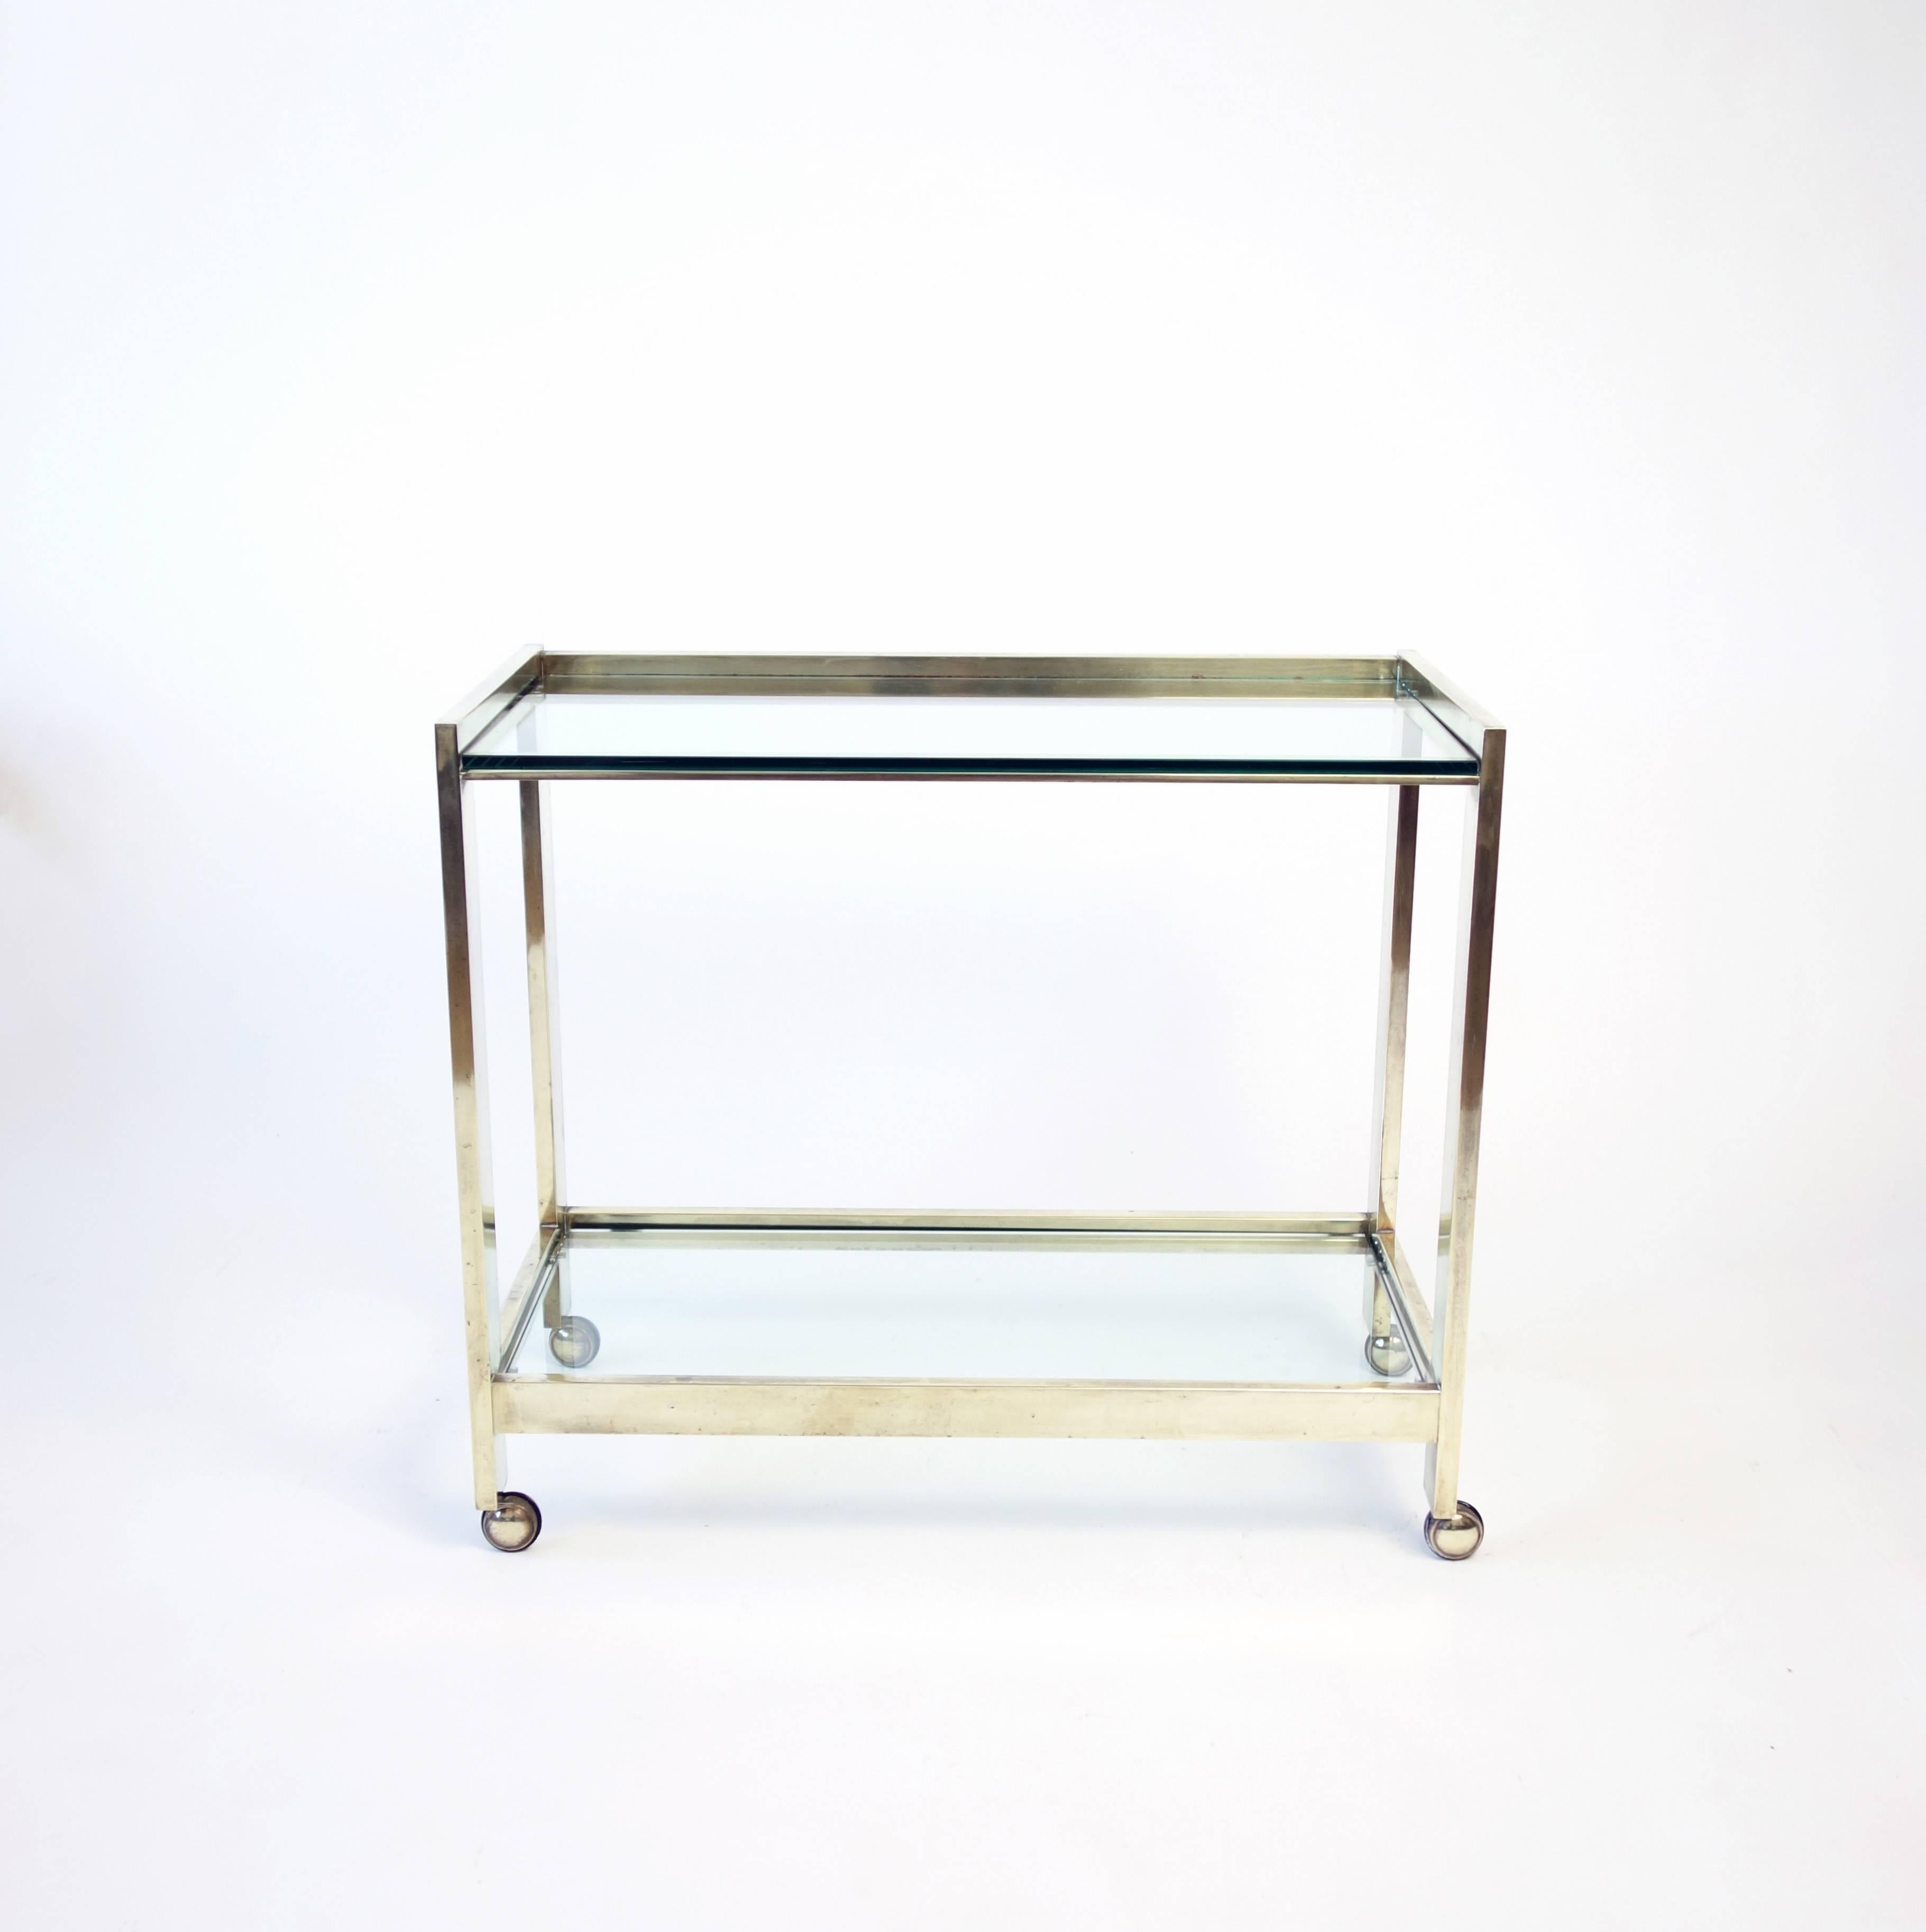 A chic, clean-lined bar cart of ample proportions, the brass surface nicely patinated.